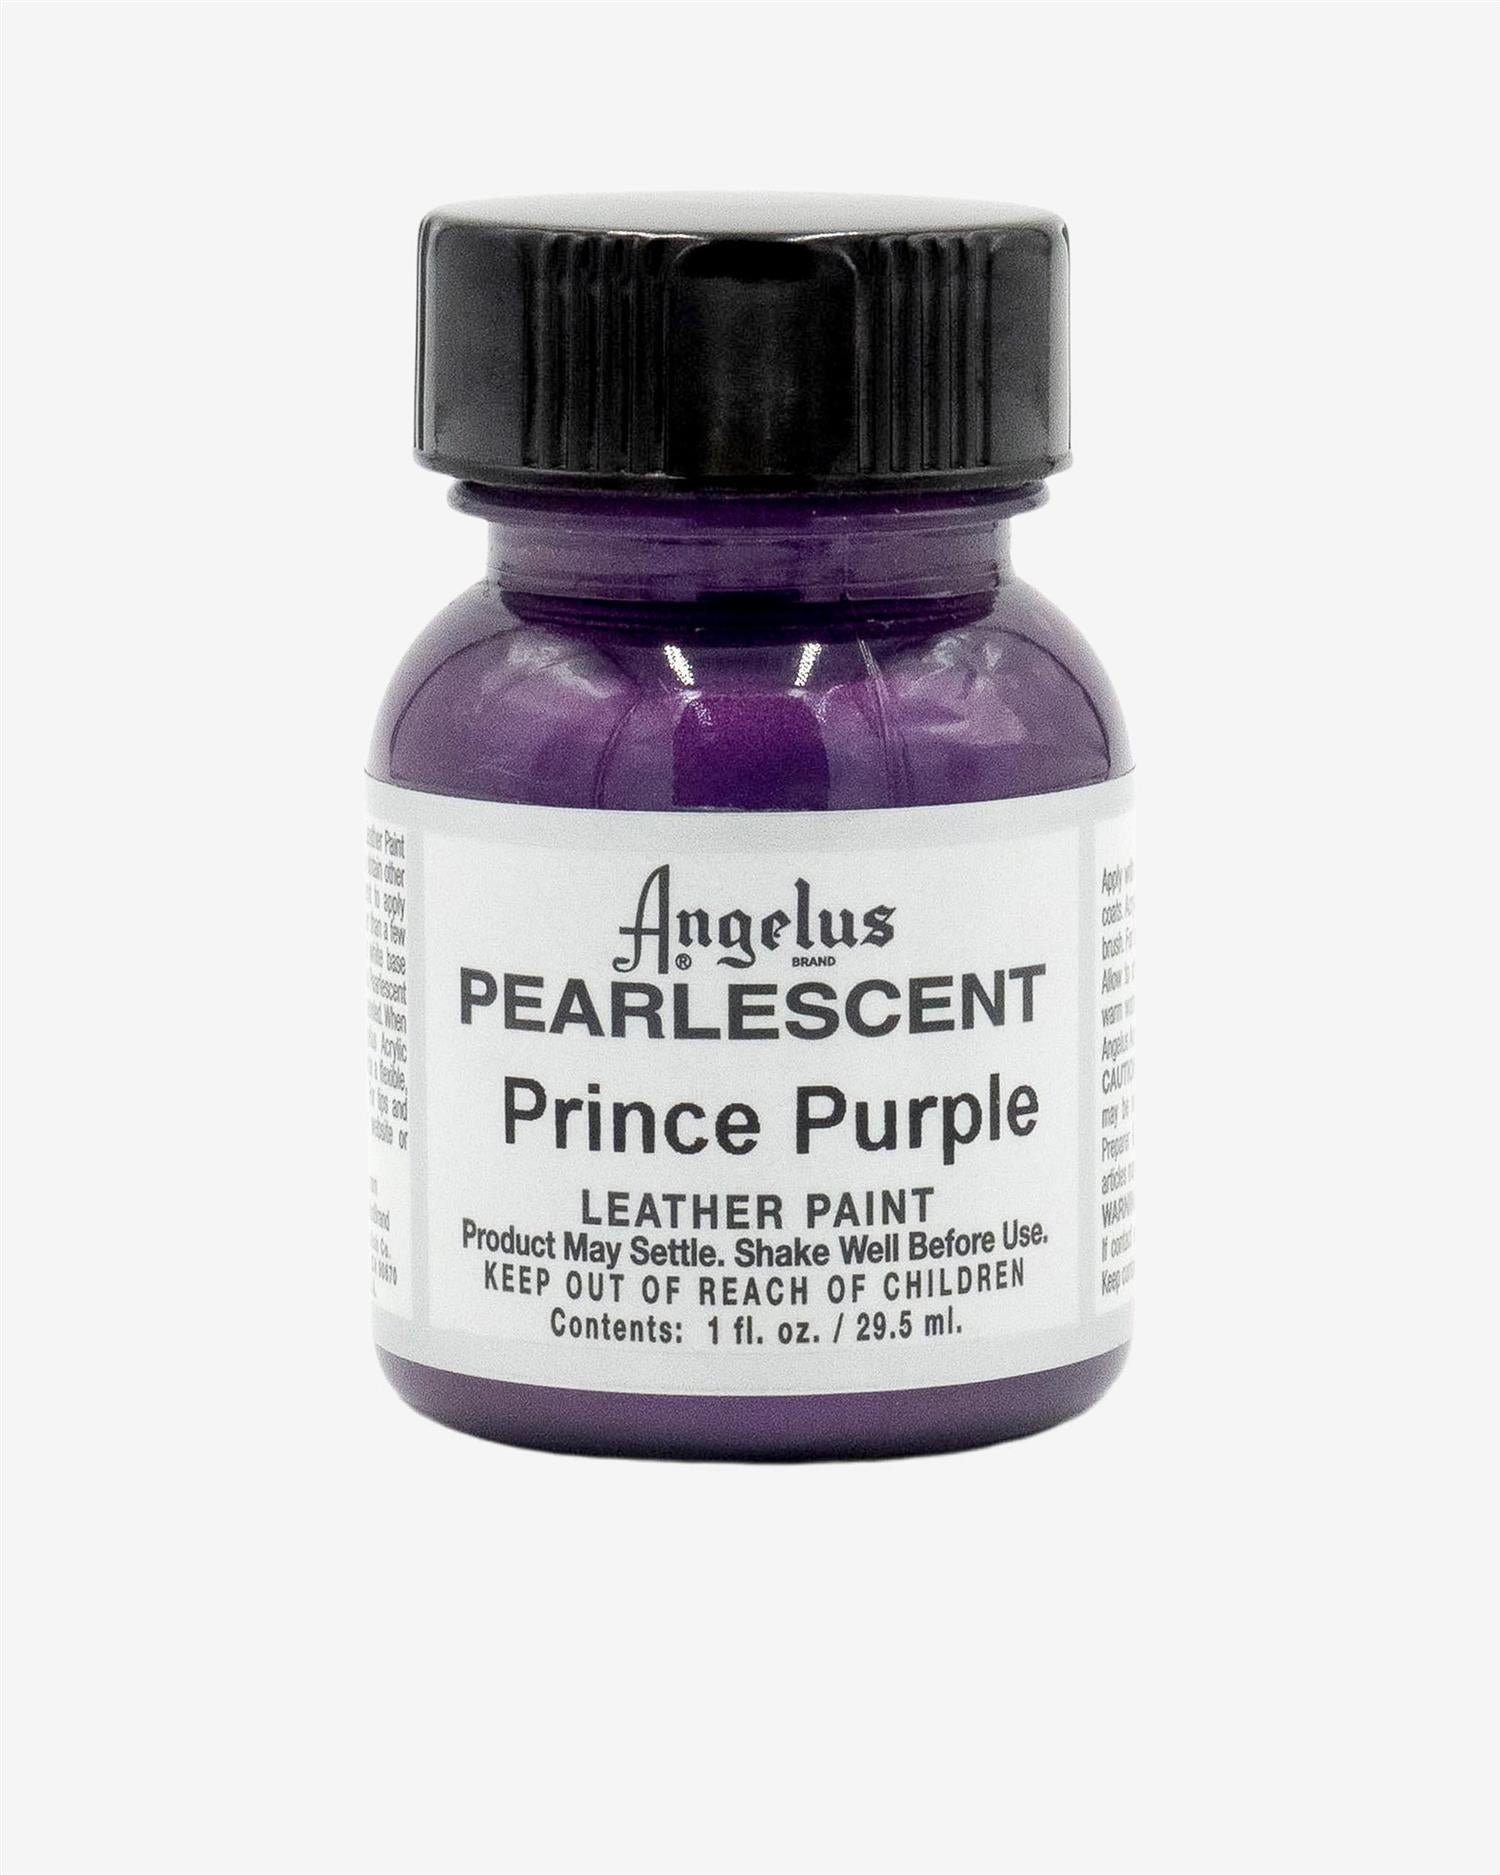 PEARLESCENT LEATHER PAINT - PRINCE PURPLE